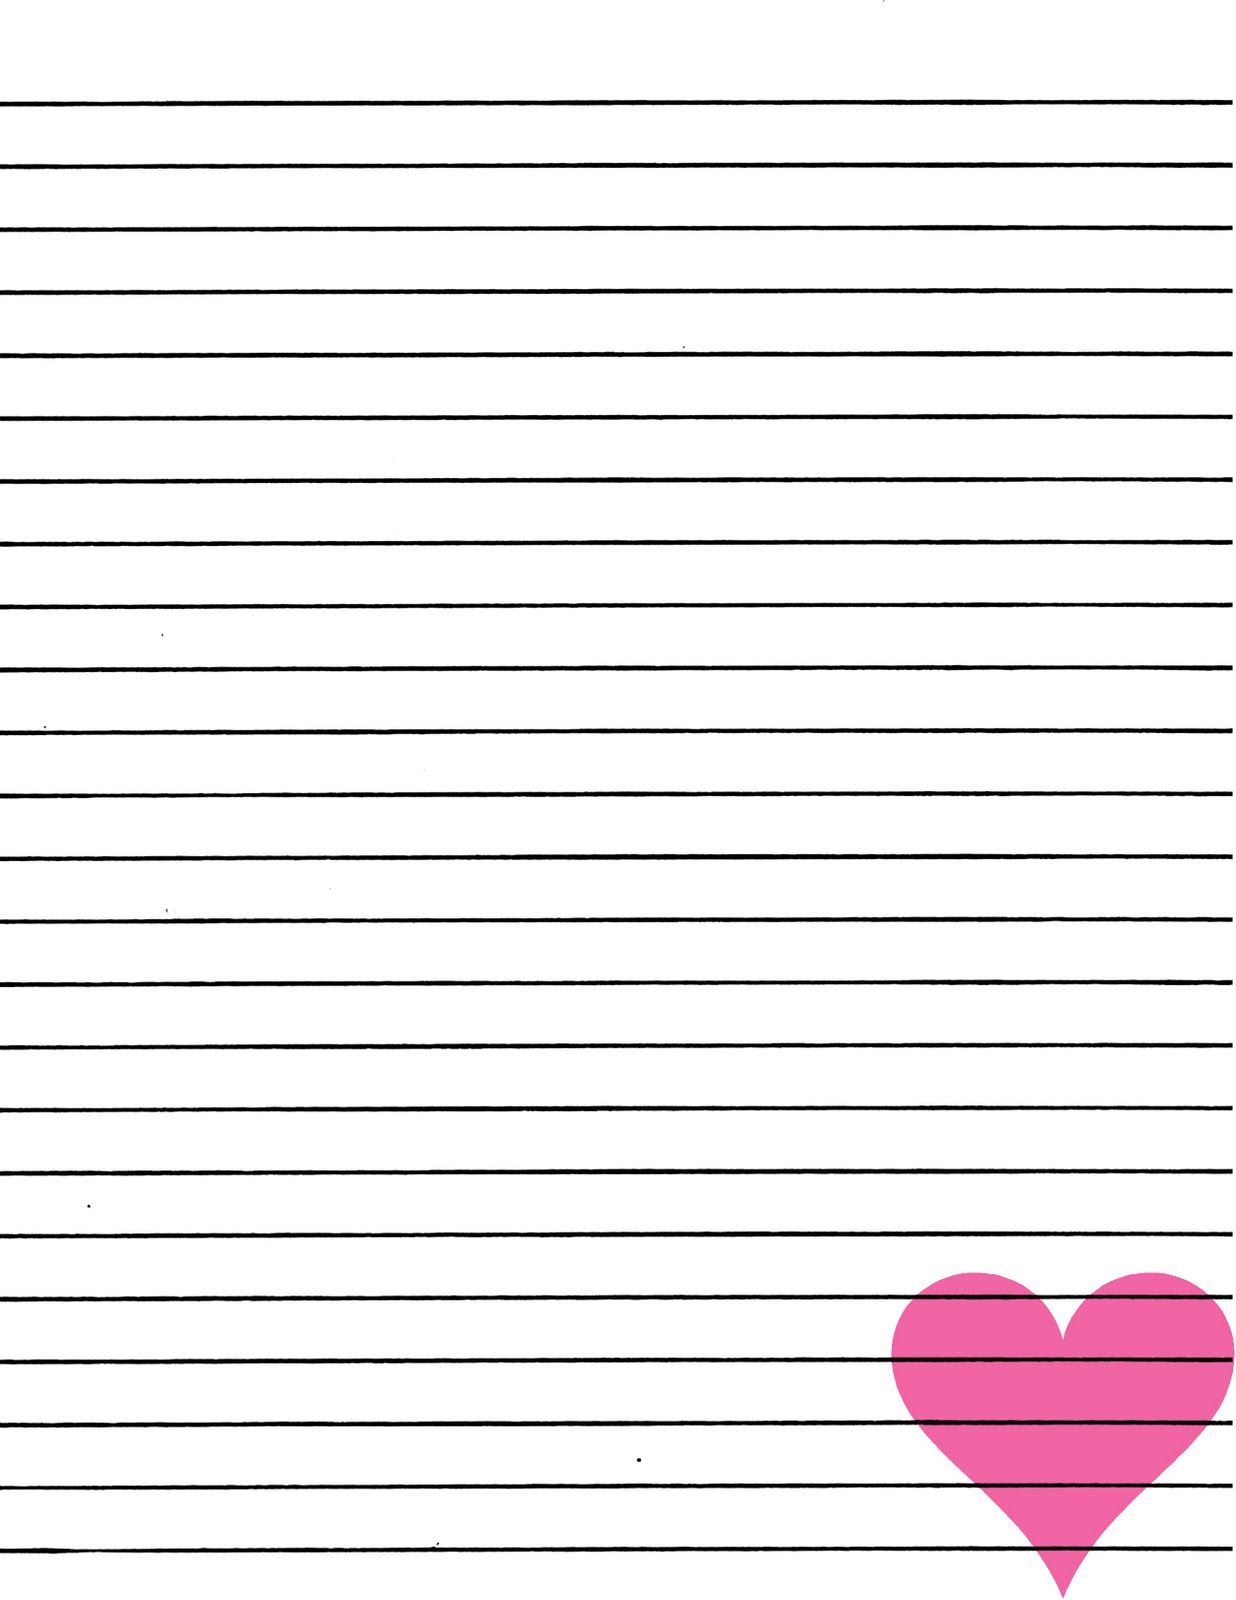 Just Smashing Paper: FREEBIE!! Pink heart lined paper printable ...